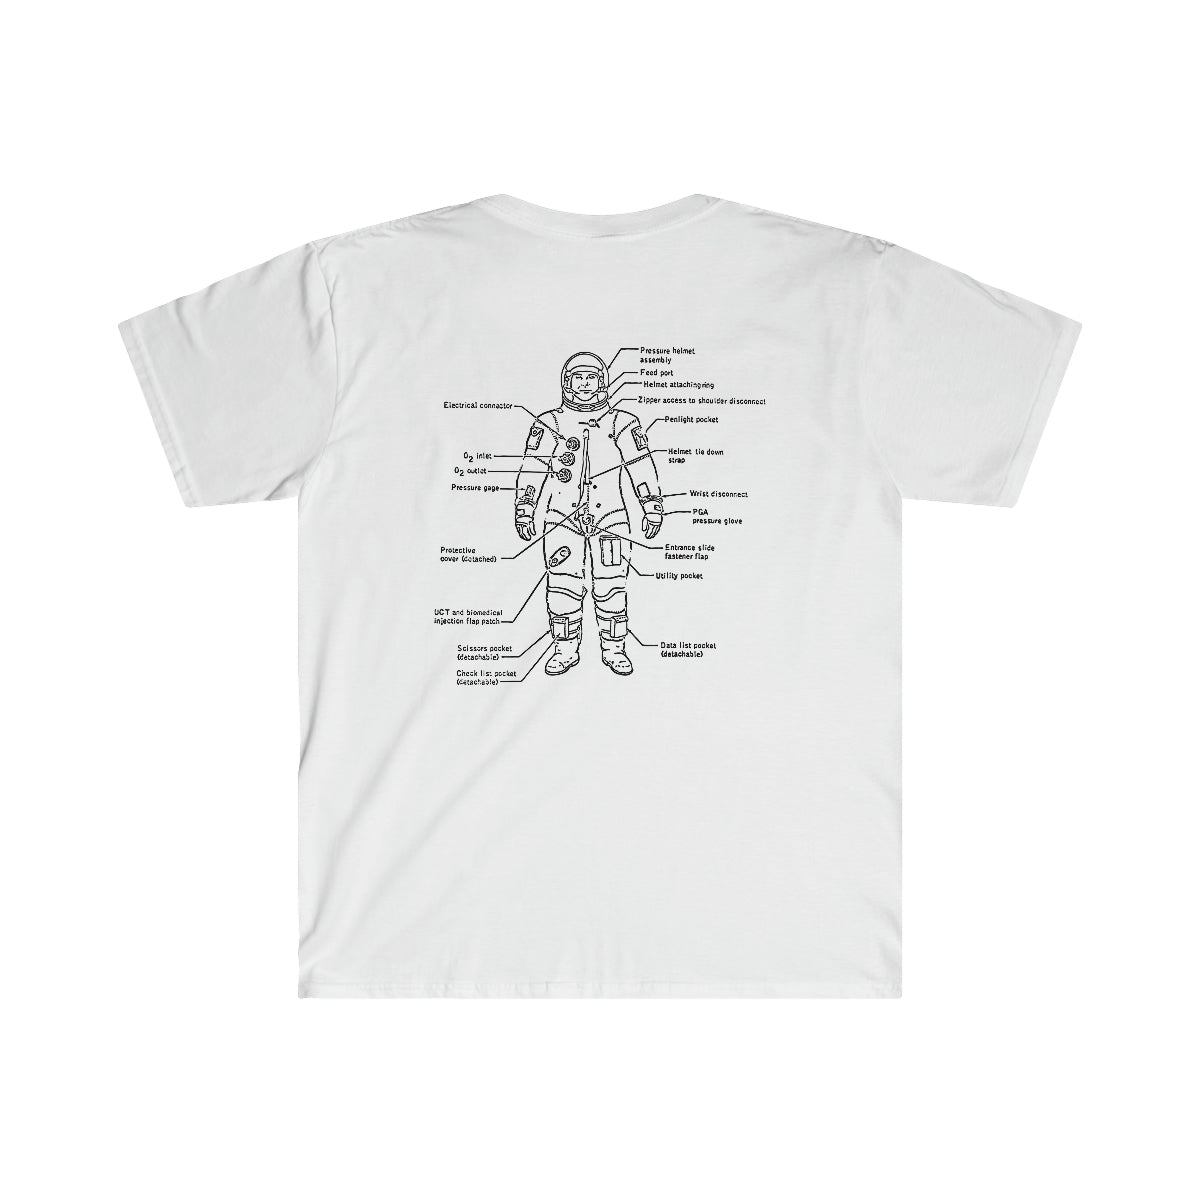 A Getting Ready to Love Again T-Shirt featuring a drawing of an astronaut.